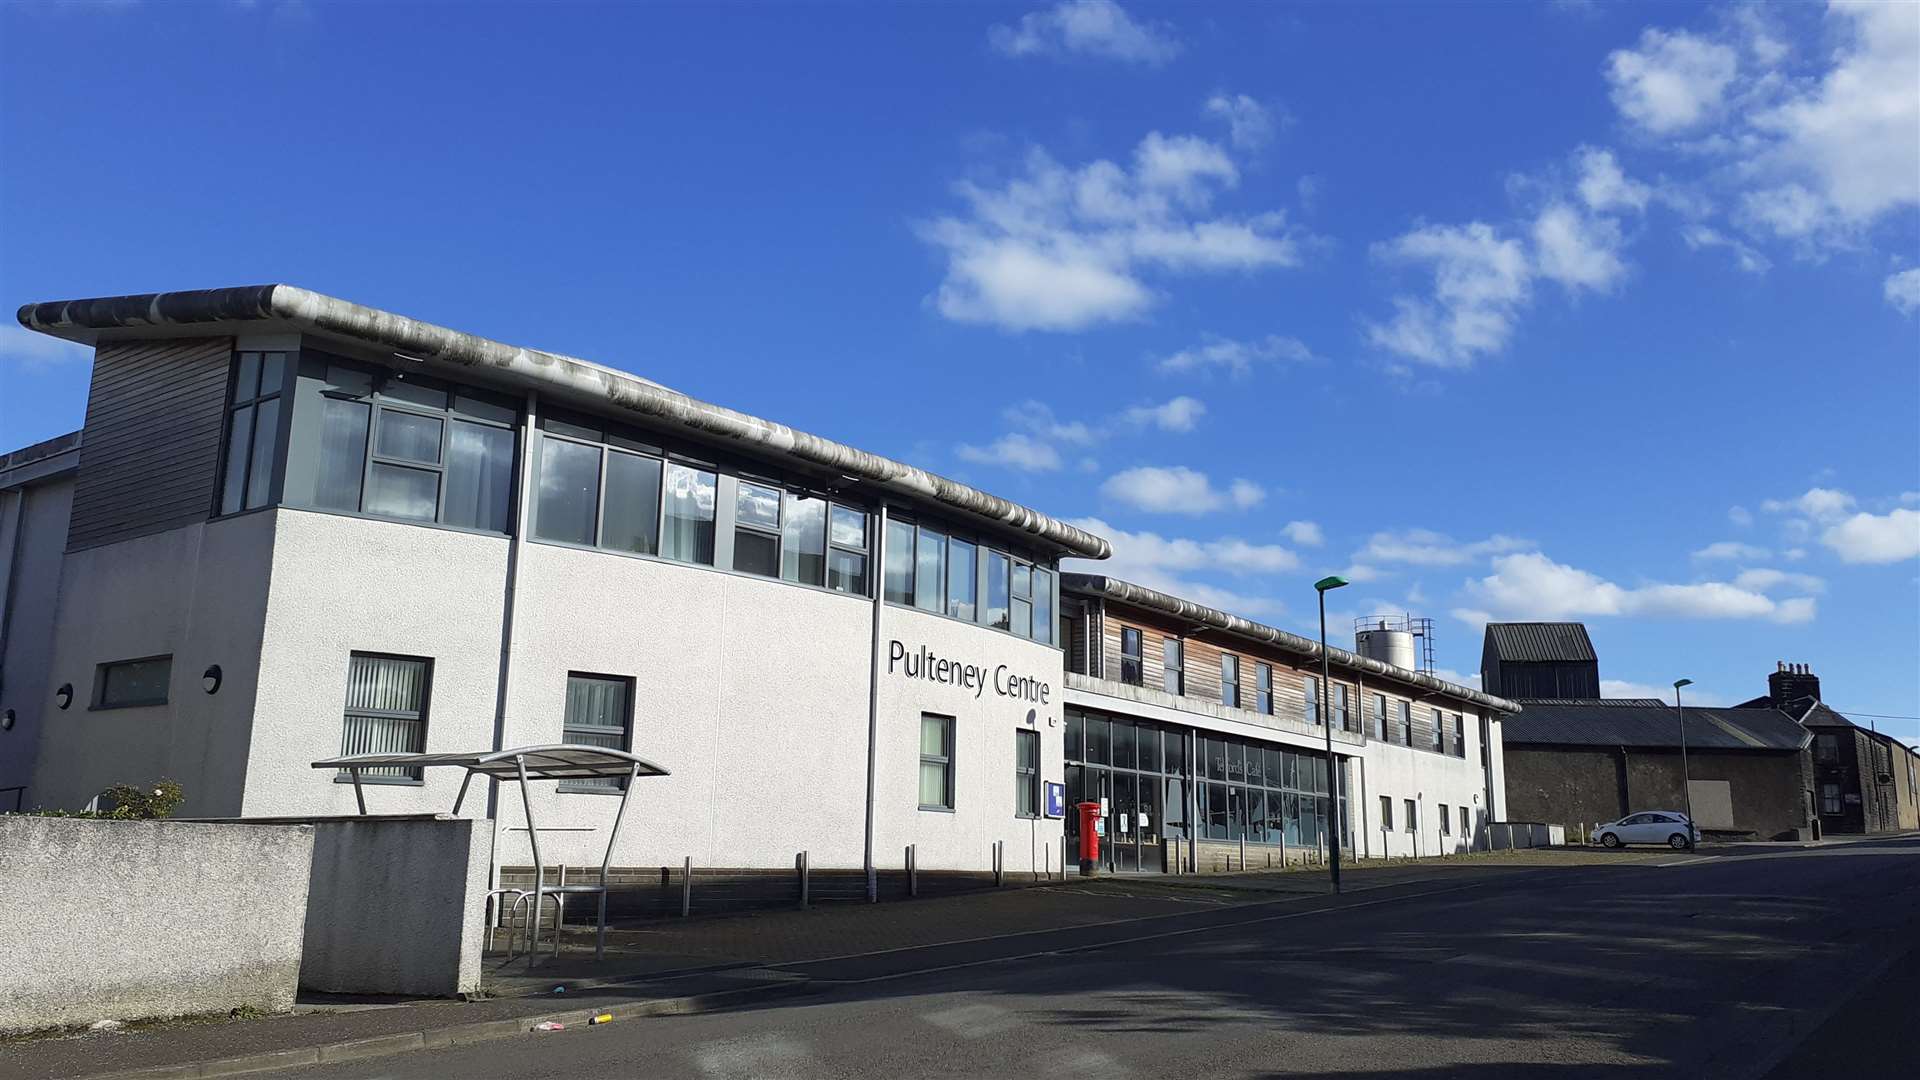 The £3.8 million Pulteney Centre opened in 2012 and is the base for all services provided by Pulteneytown People's Project.